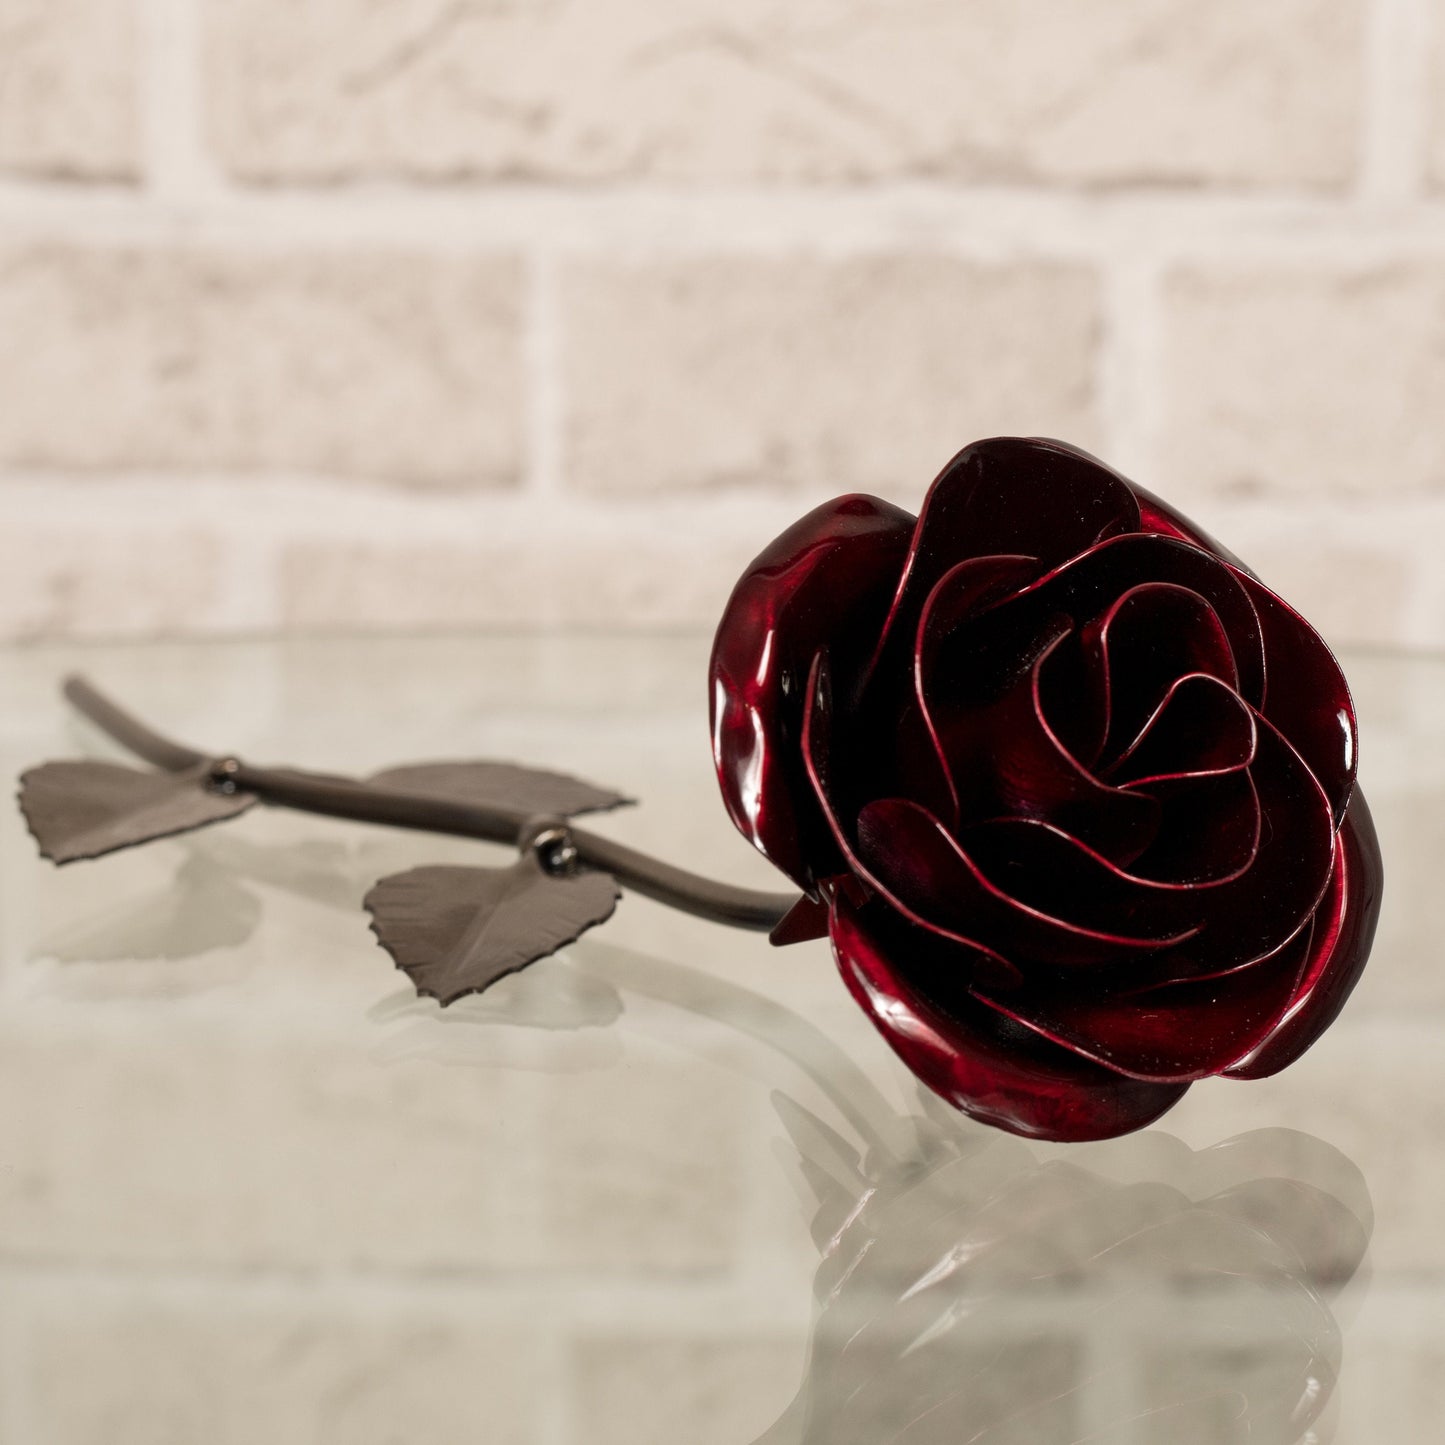 Personalized Gift Hand-Forged Wrought Iron Red Metal Rose